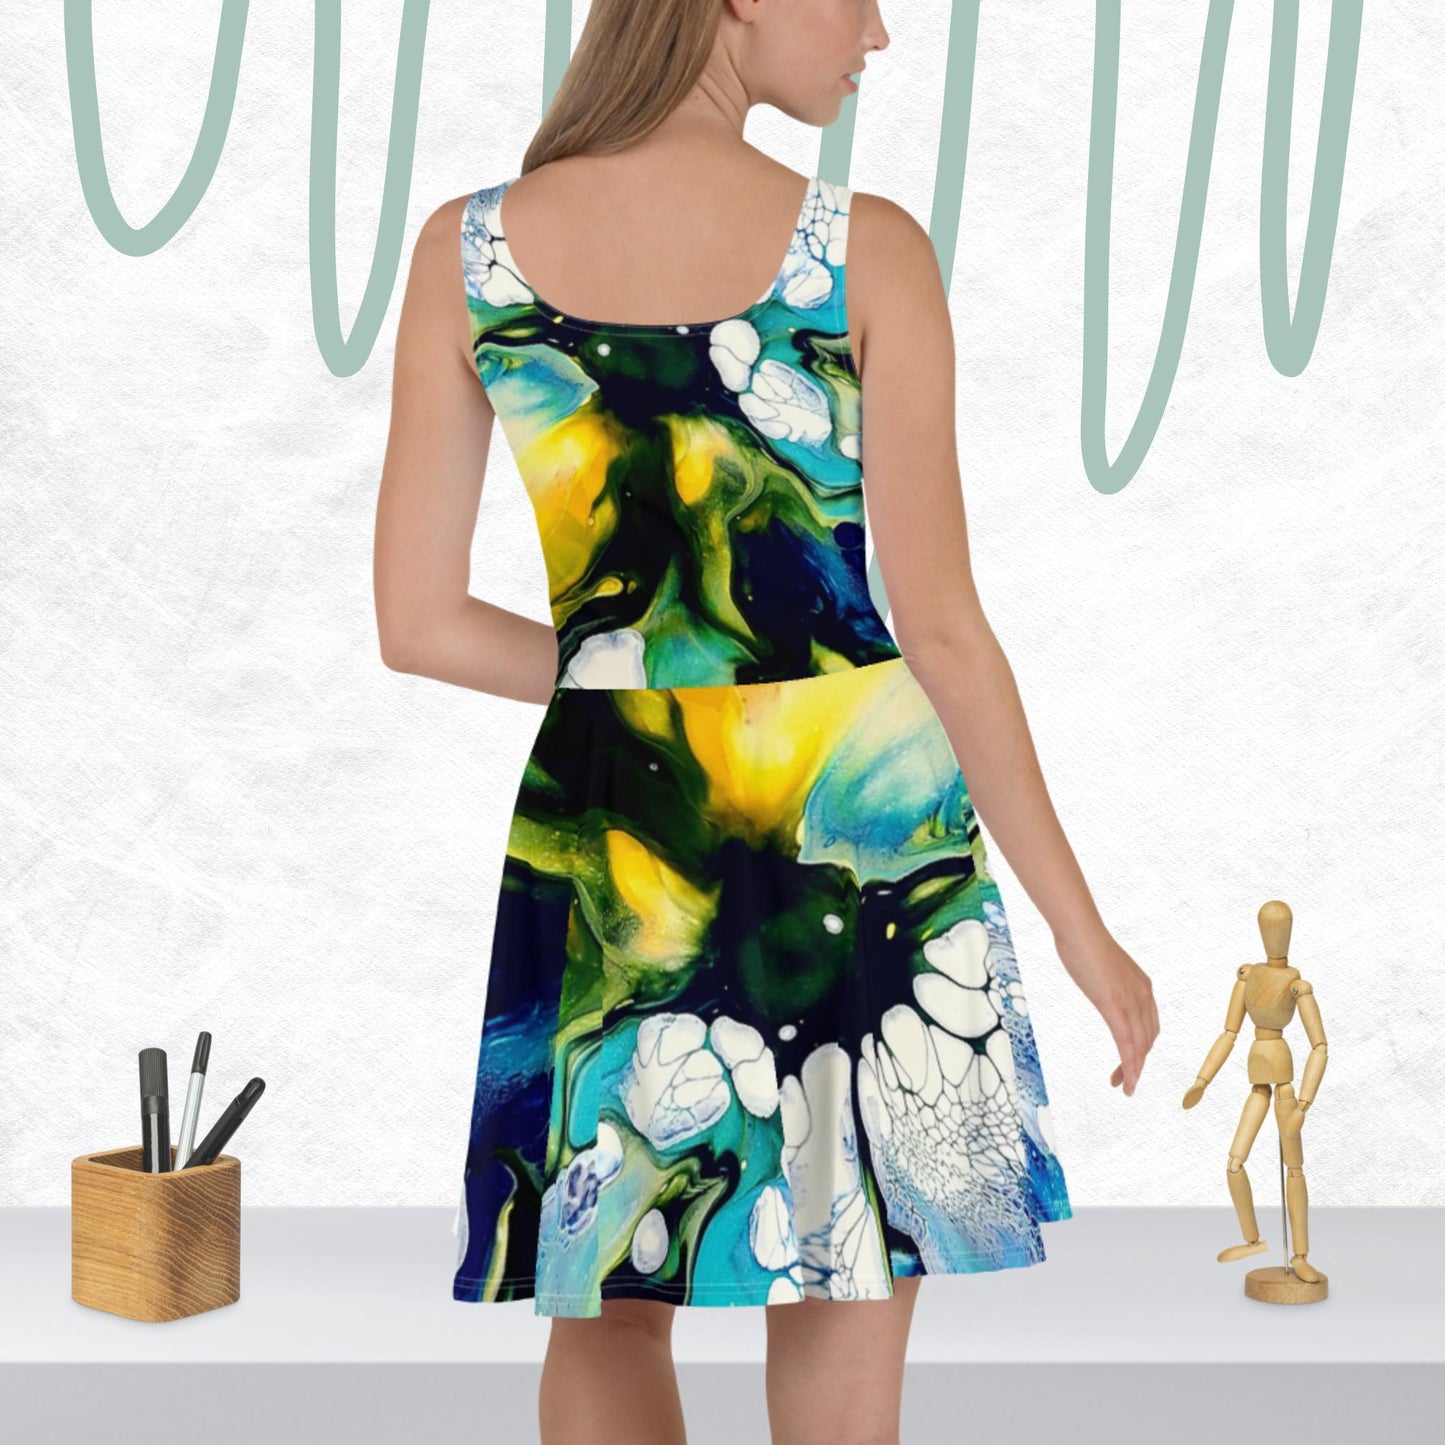 Original Abstract Floral Skater Dress designed and created by The Artful Lynk, Lynda Krupa Original Alcohol Ink Art